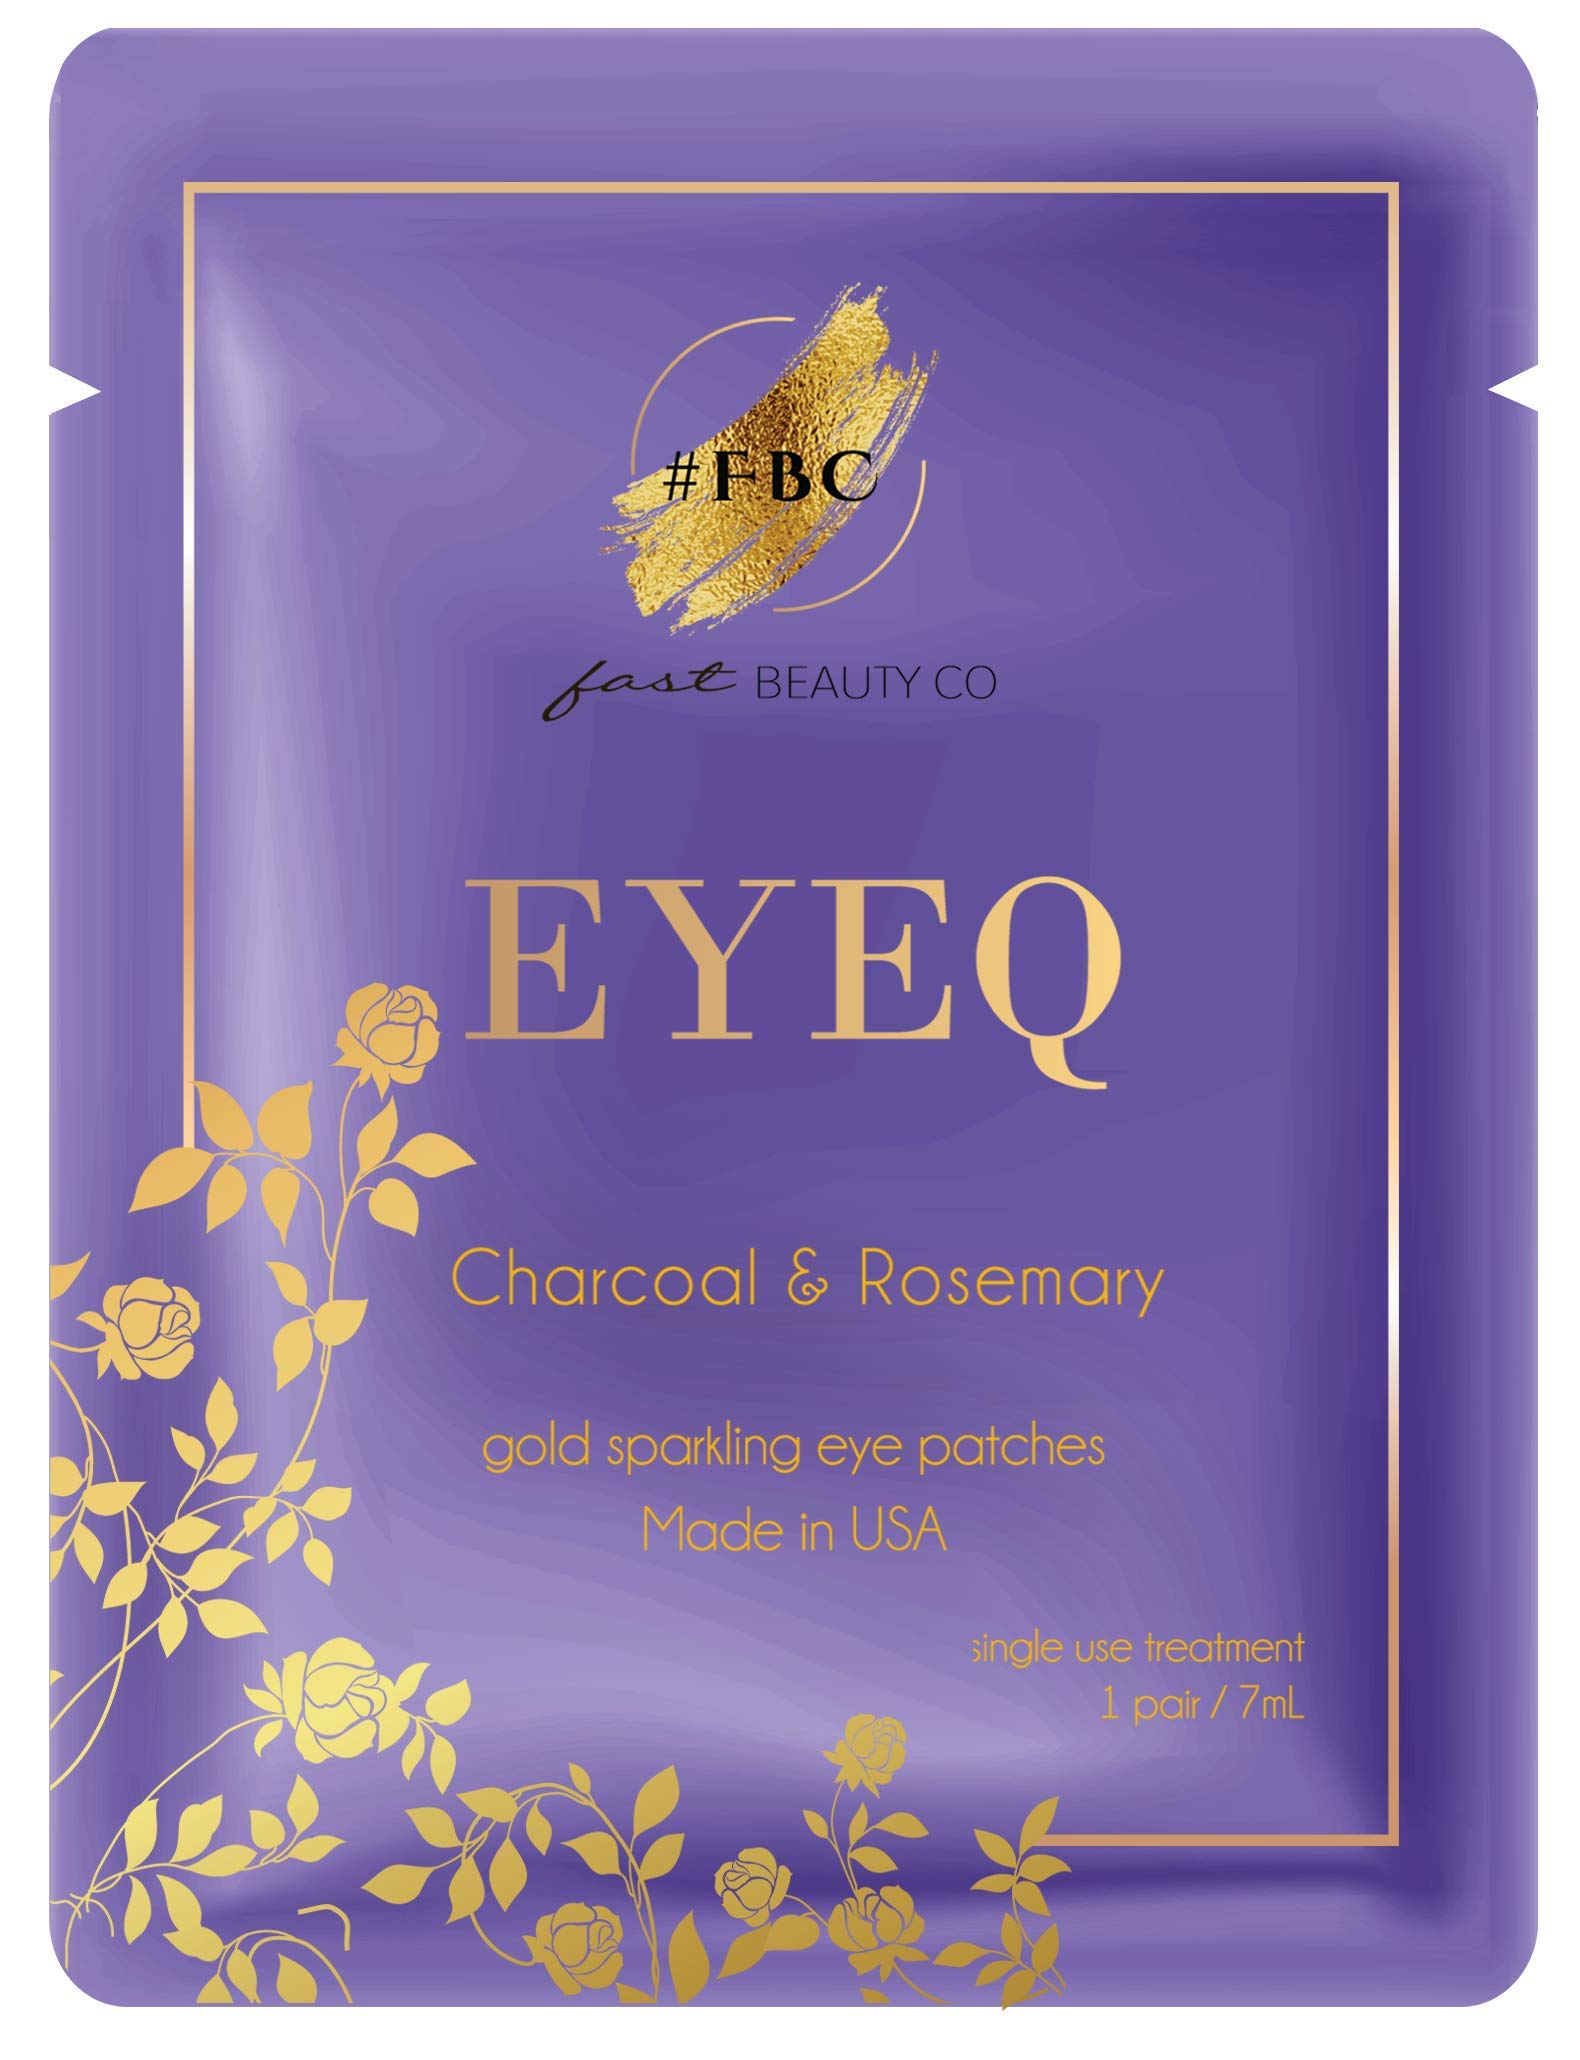 Fast Beauty Co. EyeQ Gold Under Eye Patches With Charcoal & Rosemary, 1 Pair